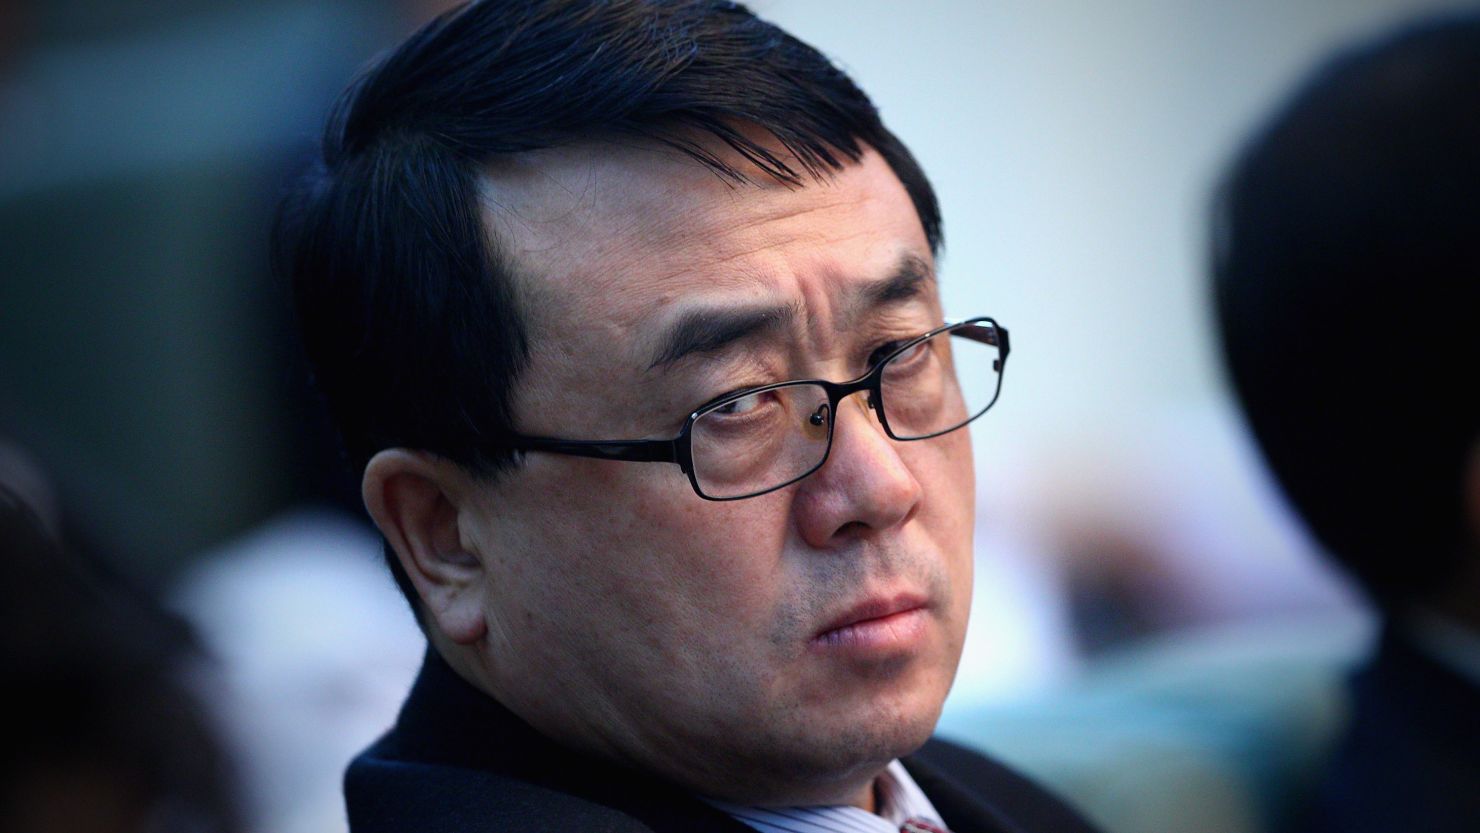 A file image of Wang Lijun at the National People's Congress in Beijing.